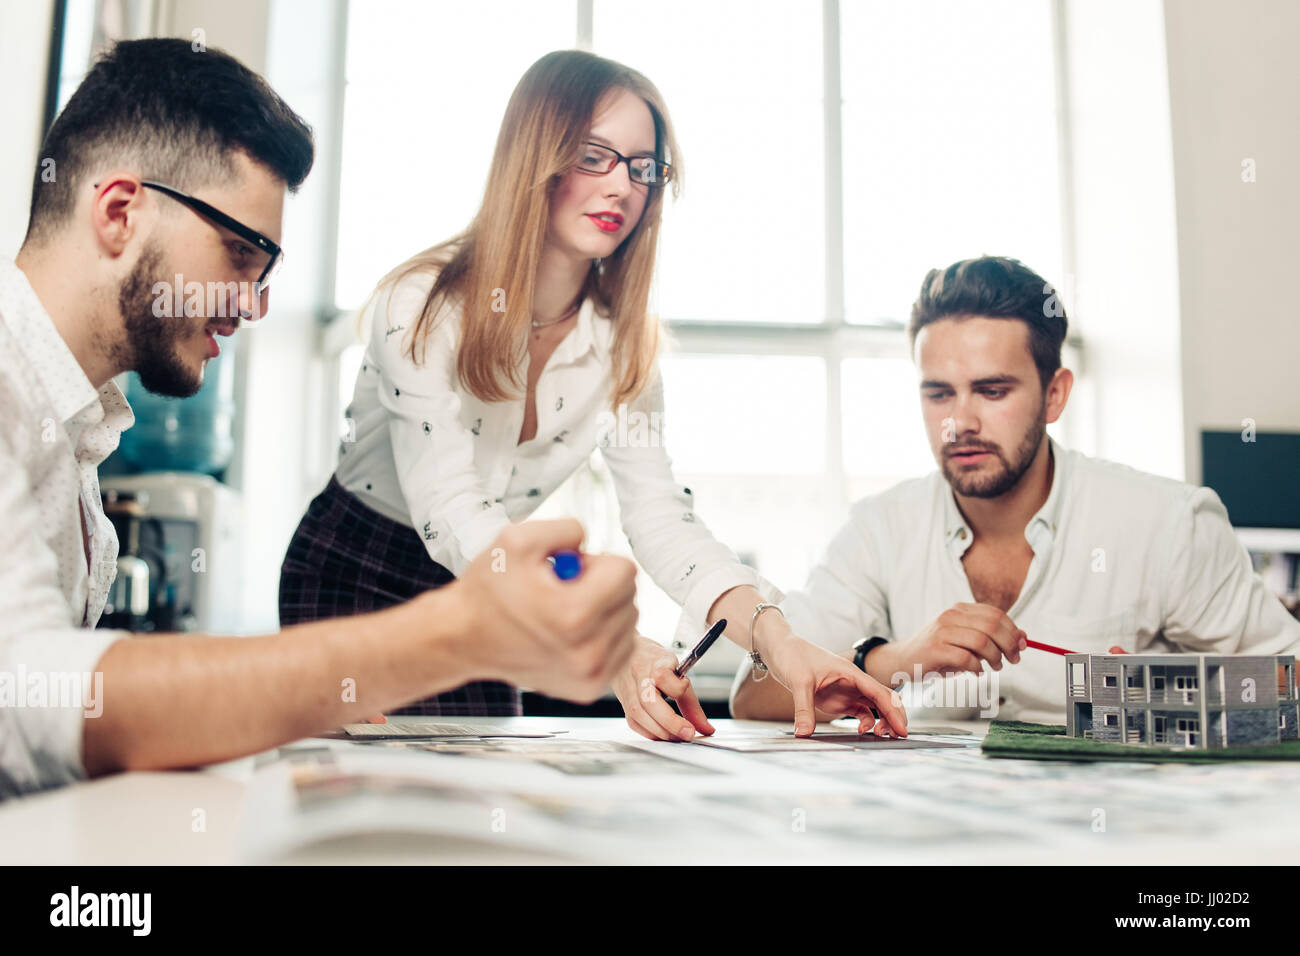 Confident team of engineers working together in a architect studio Stock Photo